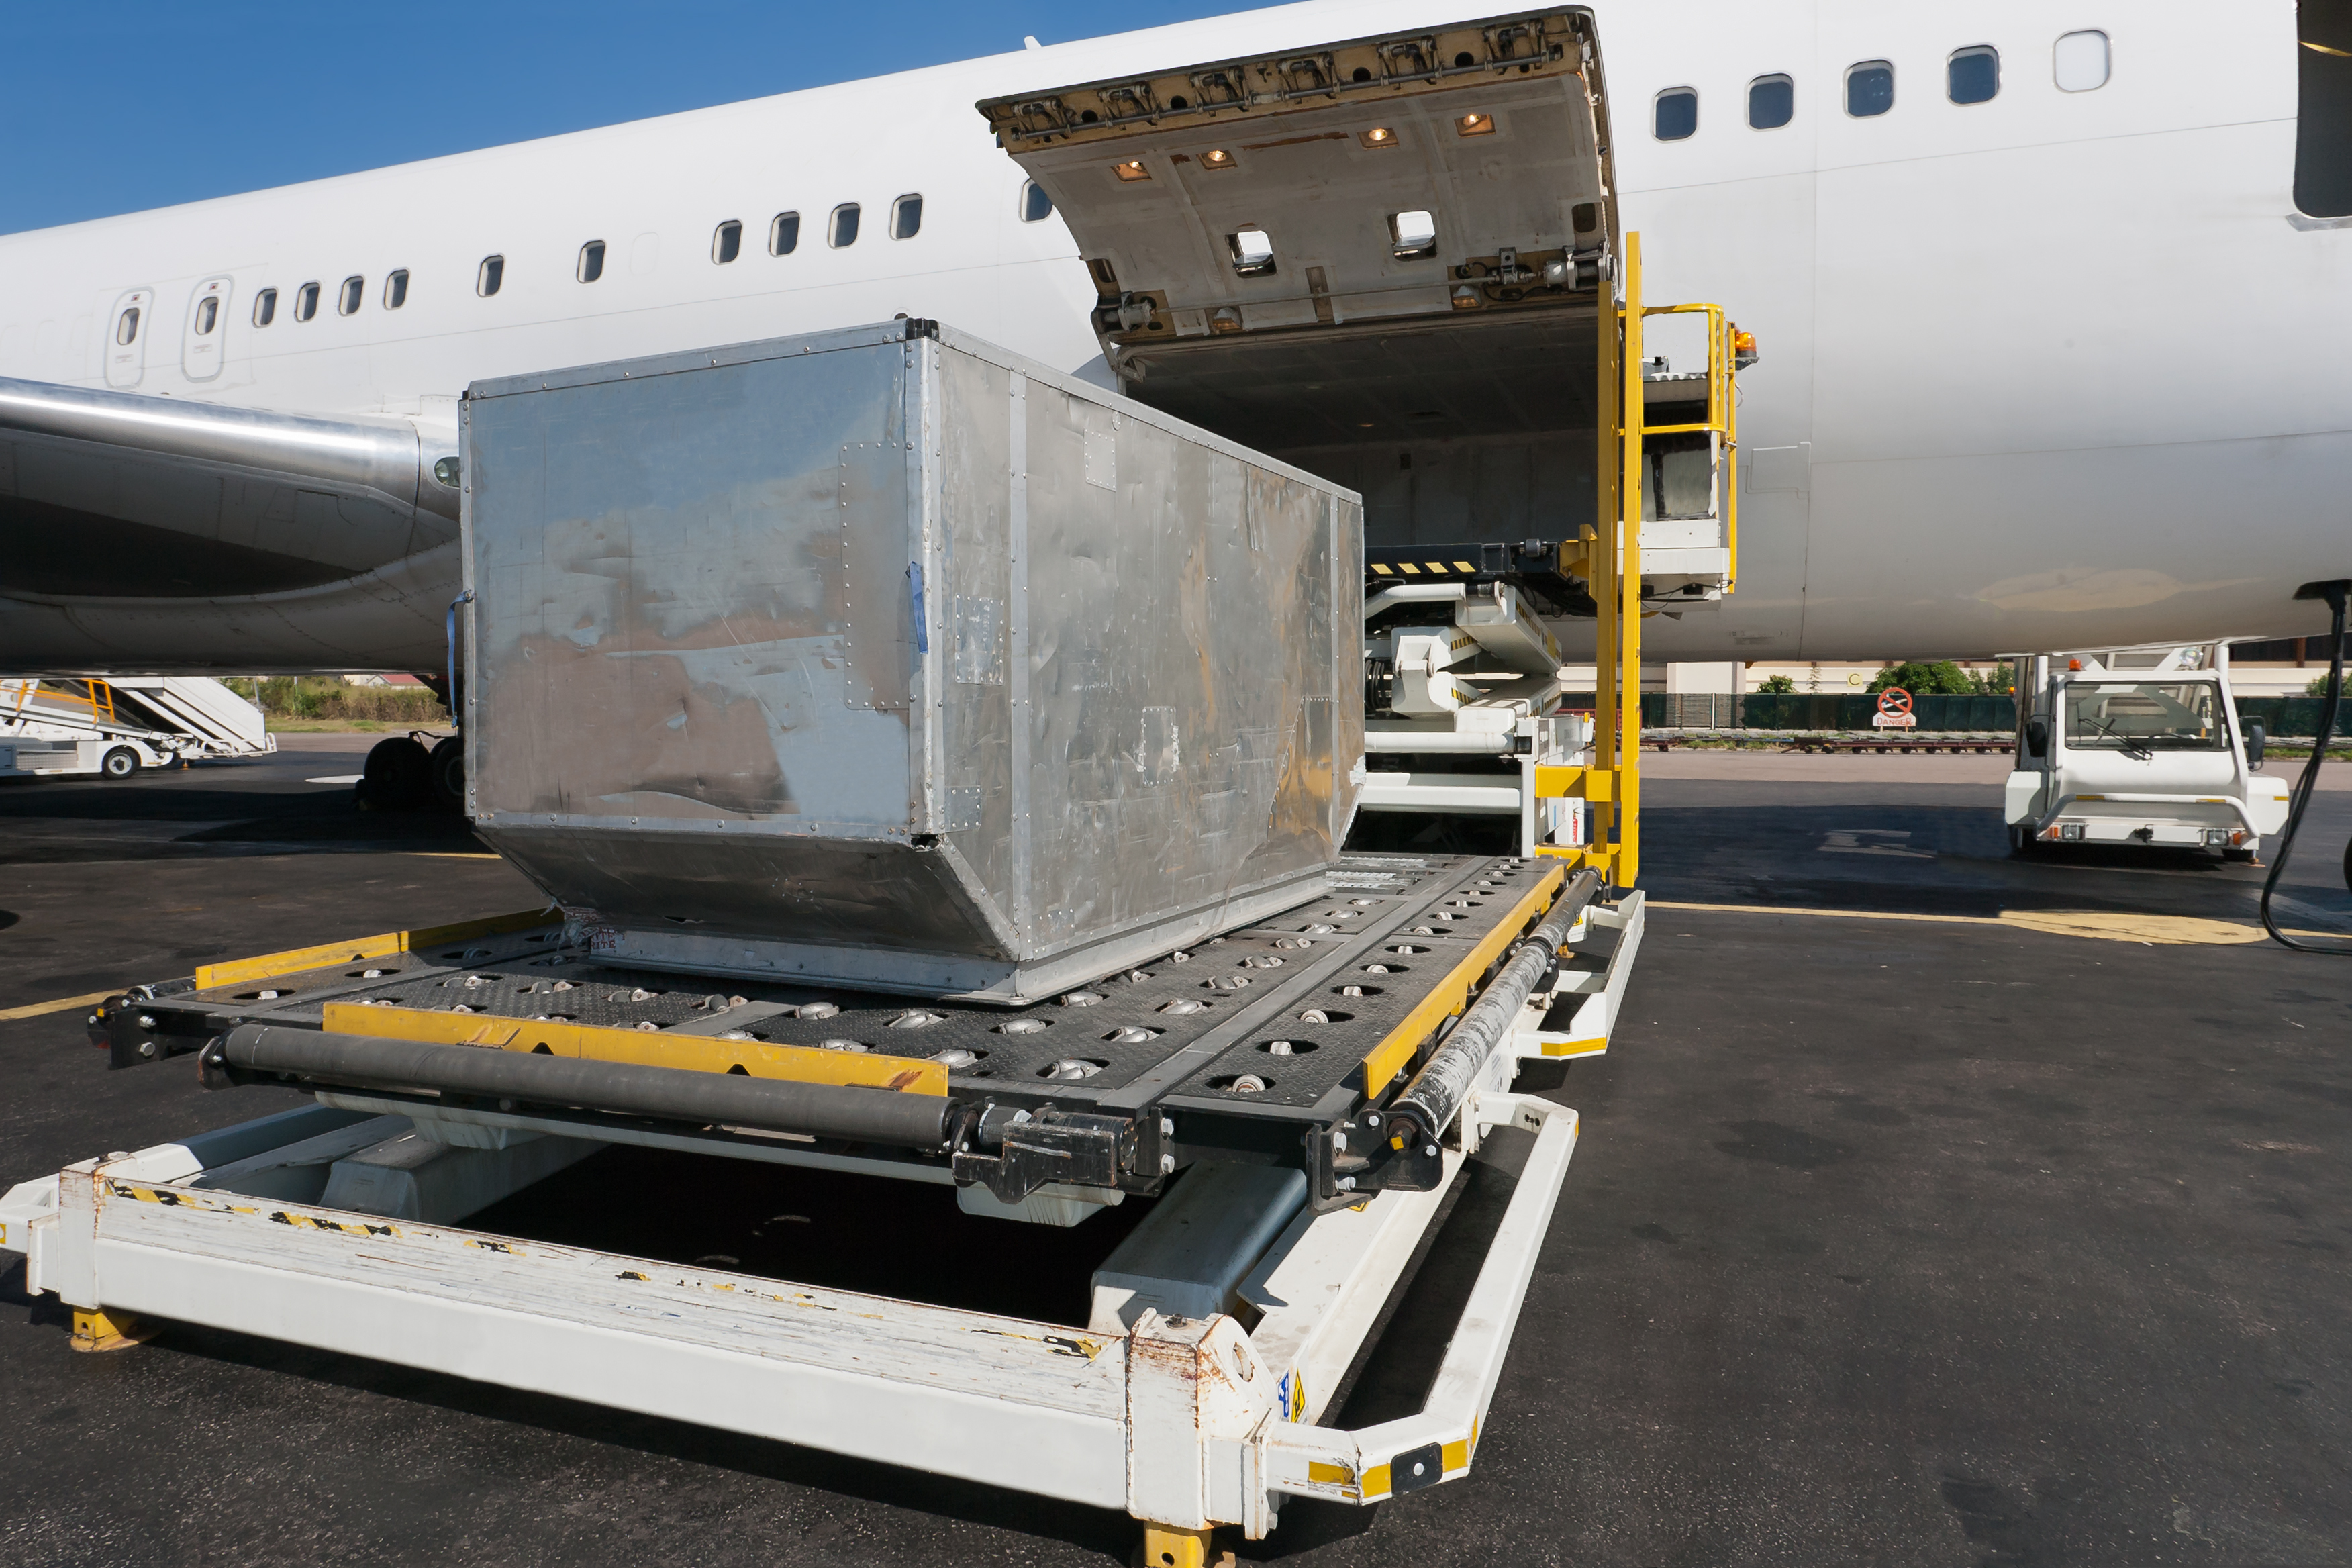 Baggage handler shows the complicated way luggage is loaded onto